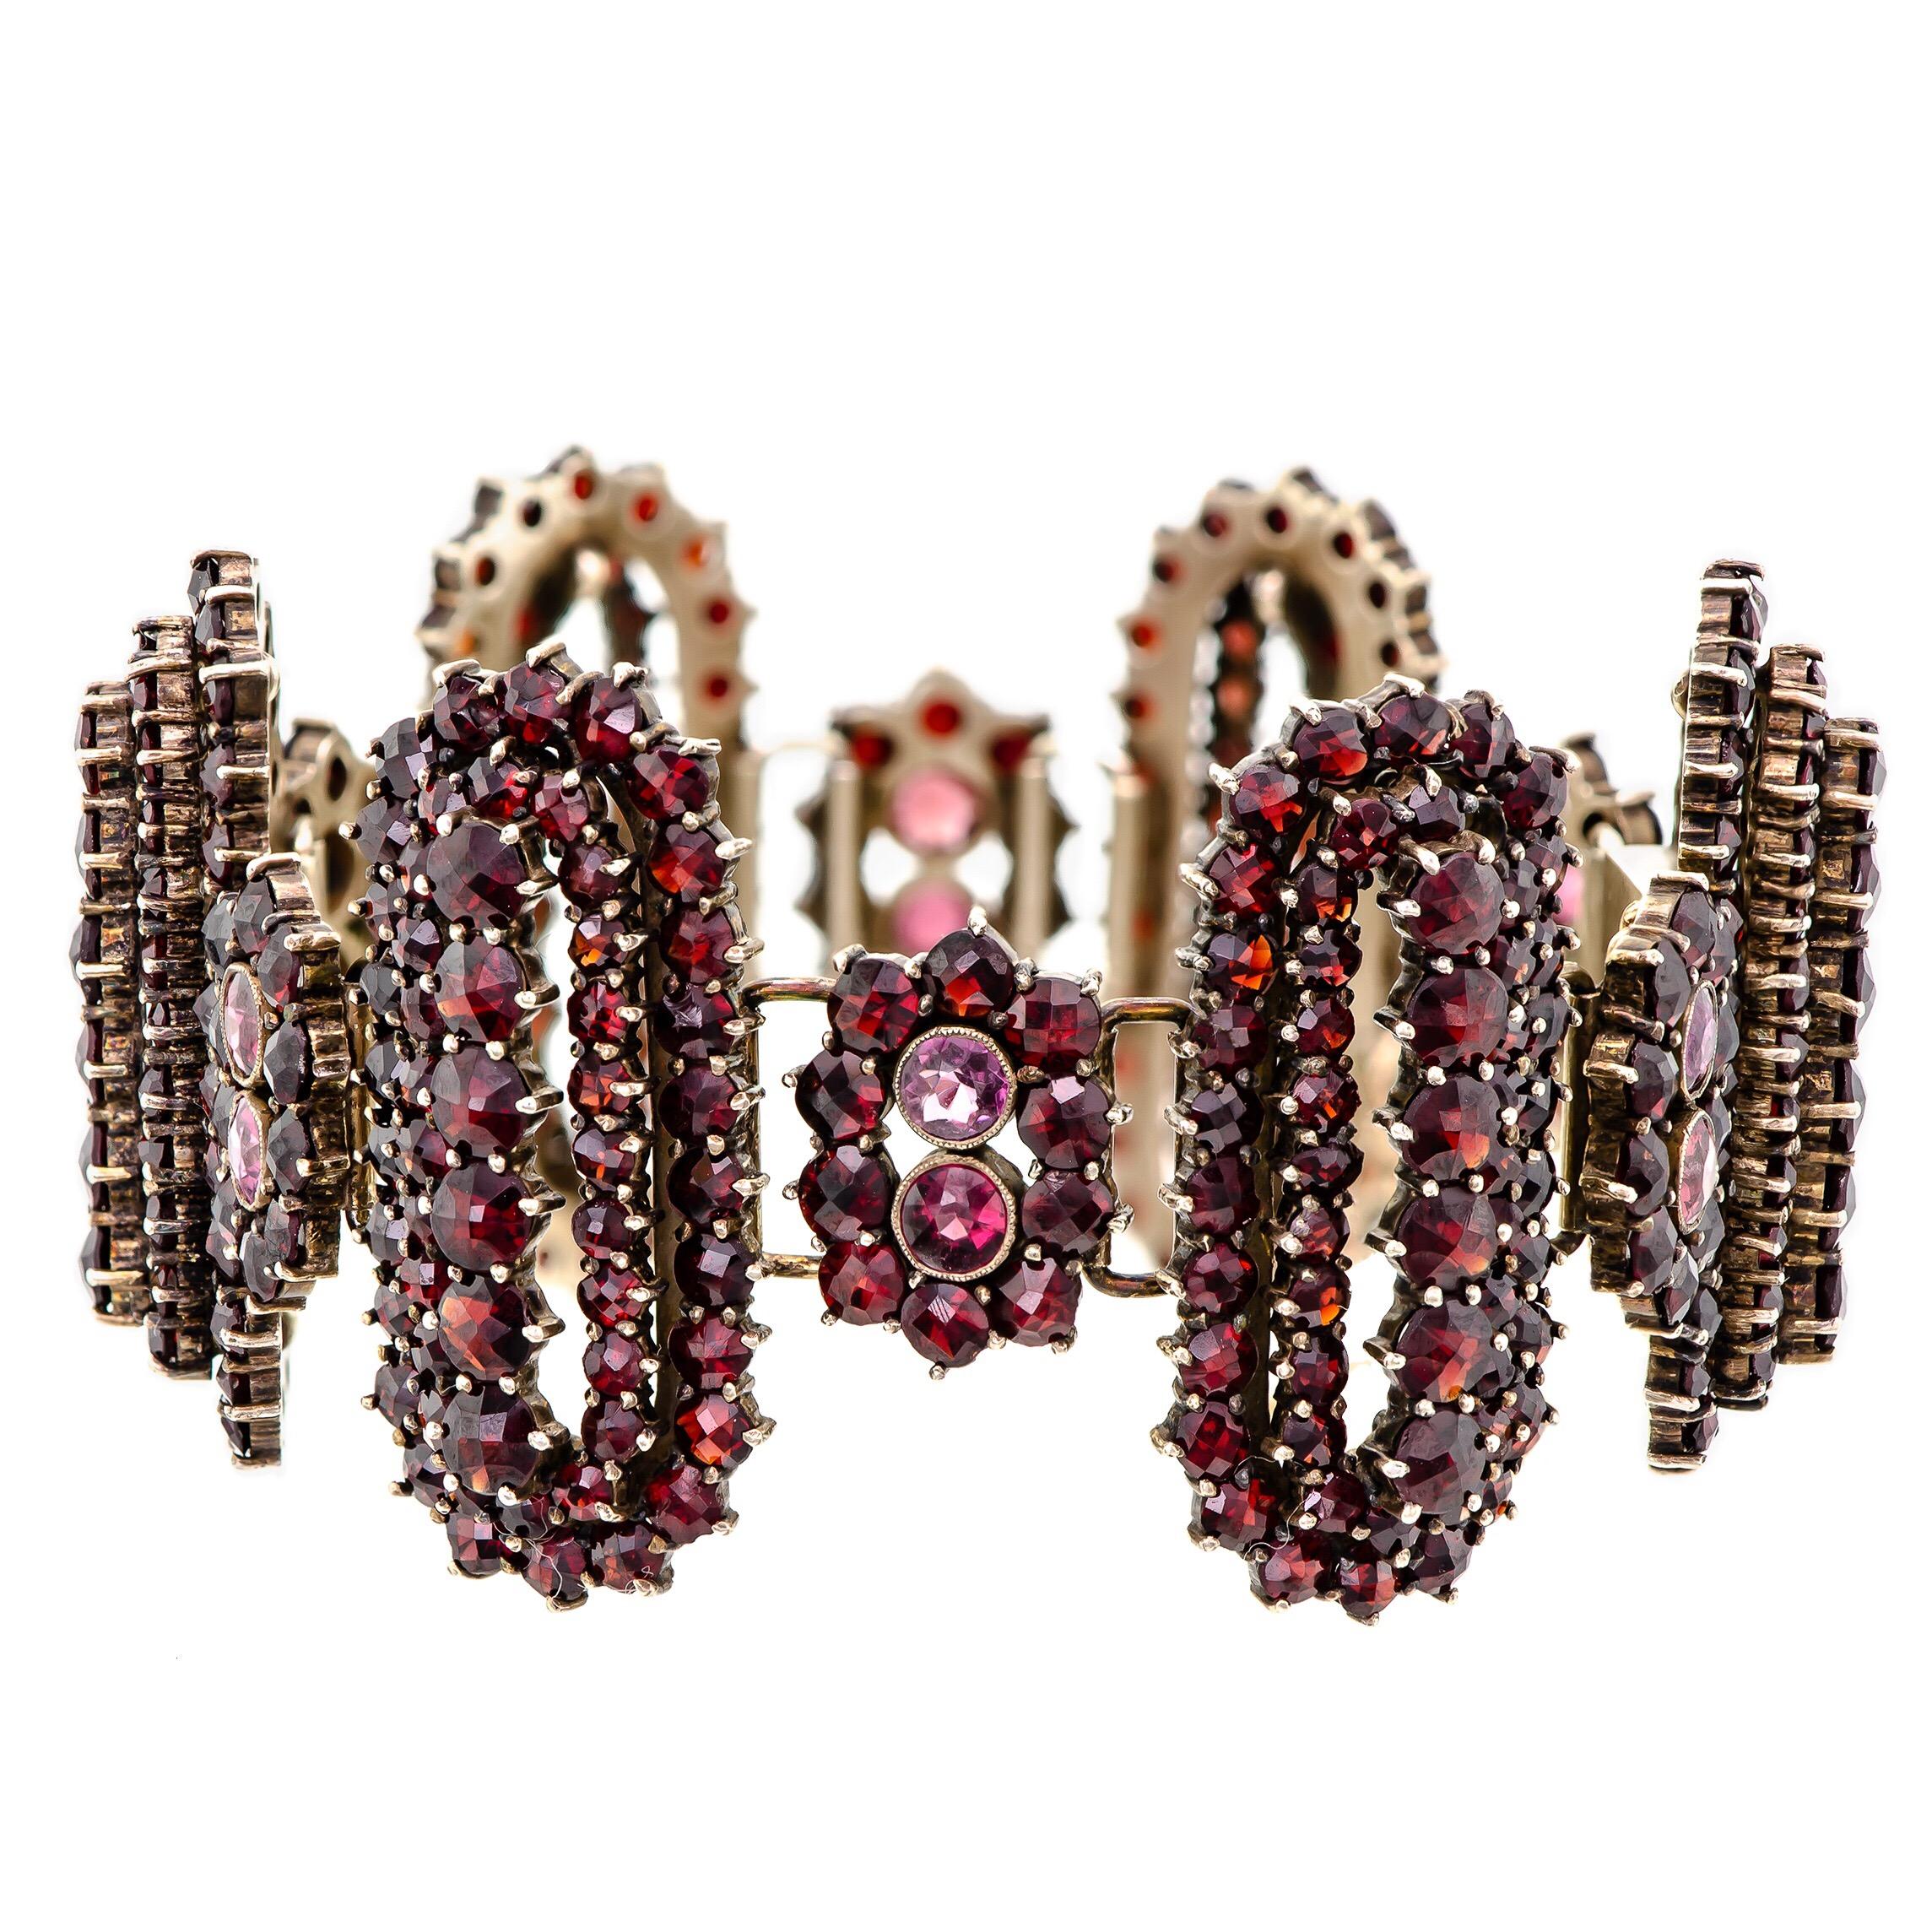 Magnificent vintage garnet and gilt hinged wide flexible bracelet - set with numerous dazzling rose cut garnets into a repeated alternating hinged pattern of small and large lozenge-shaped sections. The garnets are deep in color and set in gilt or